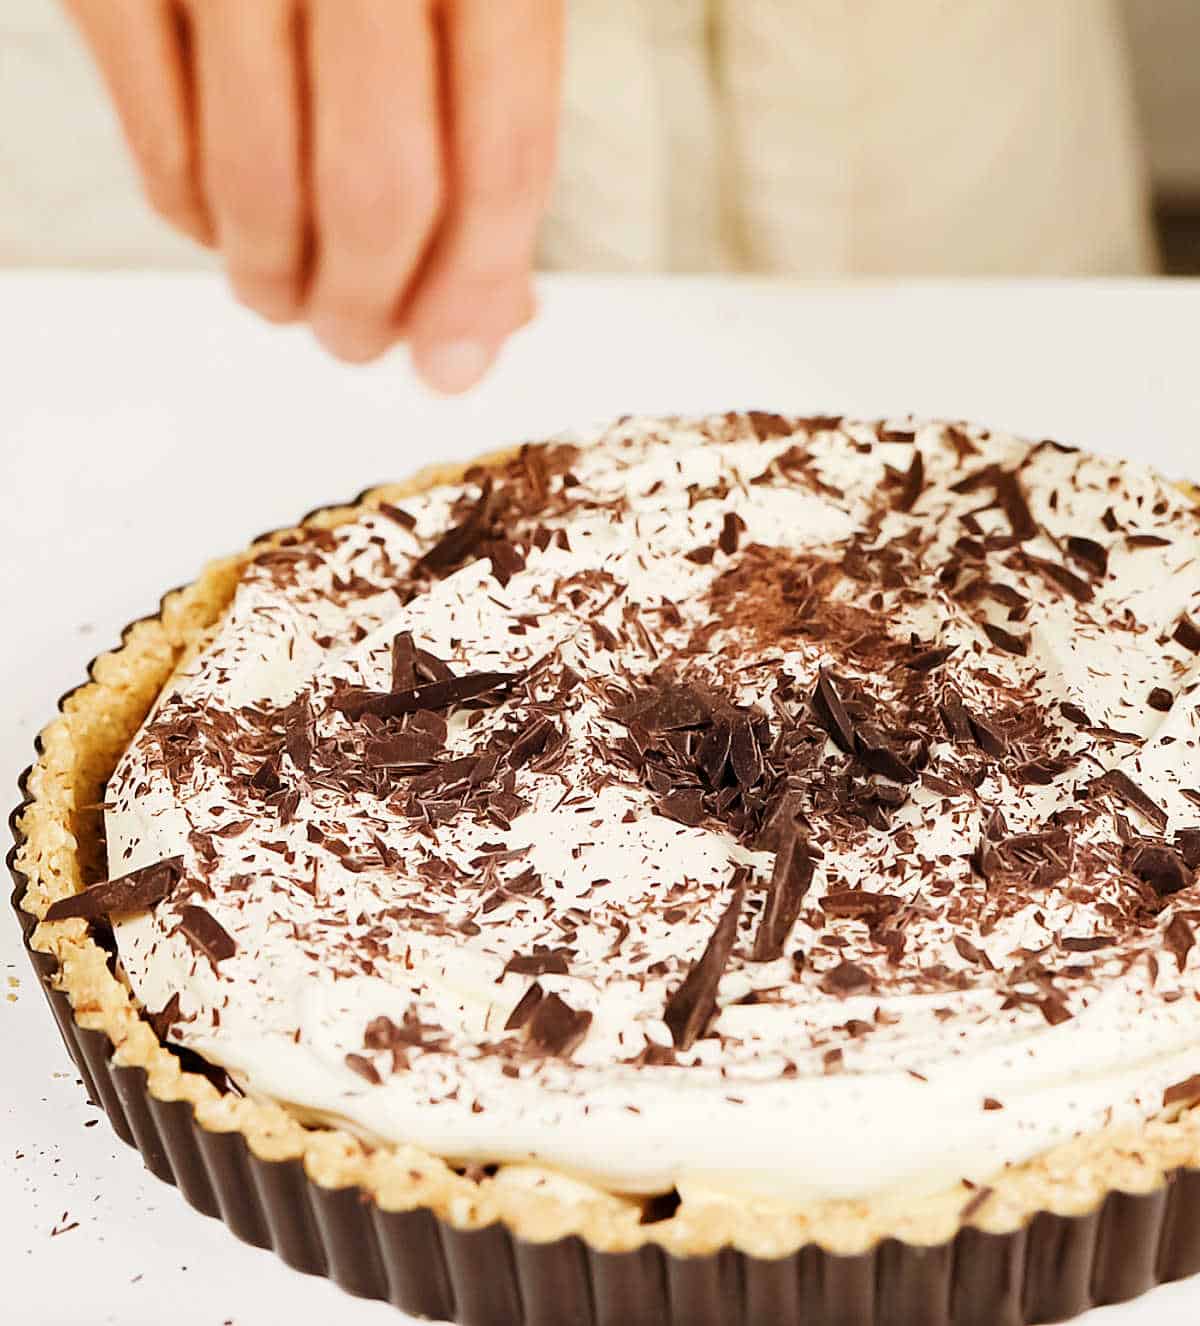 Hand sprinkling grated chocolate on whipped cream in pie pan on white surface.